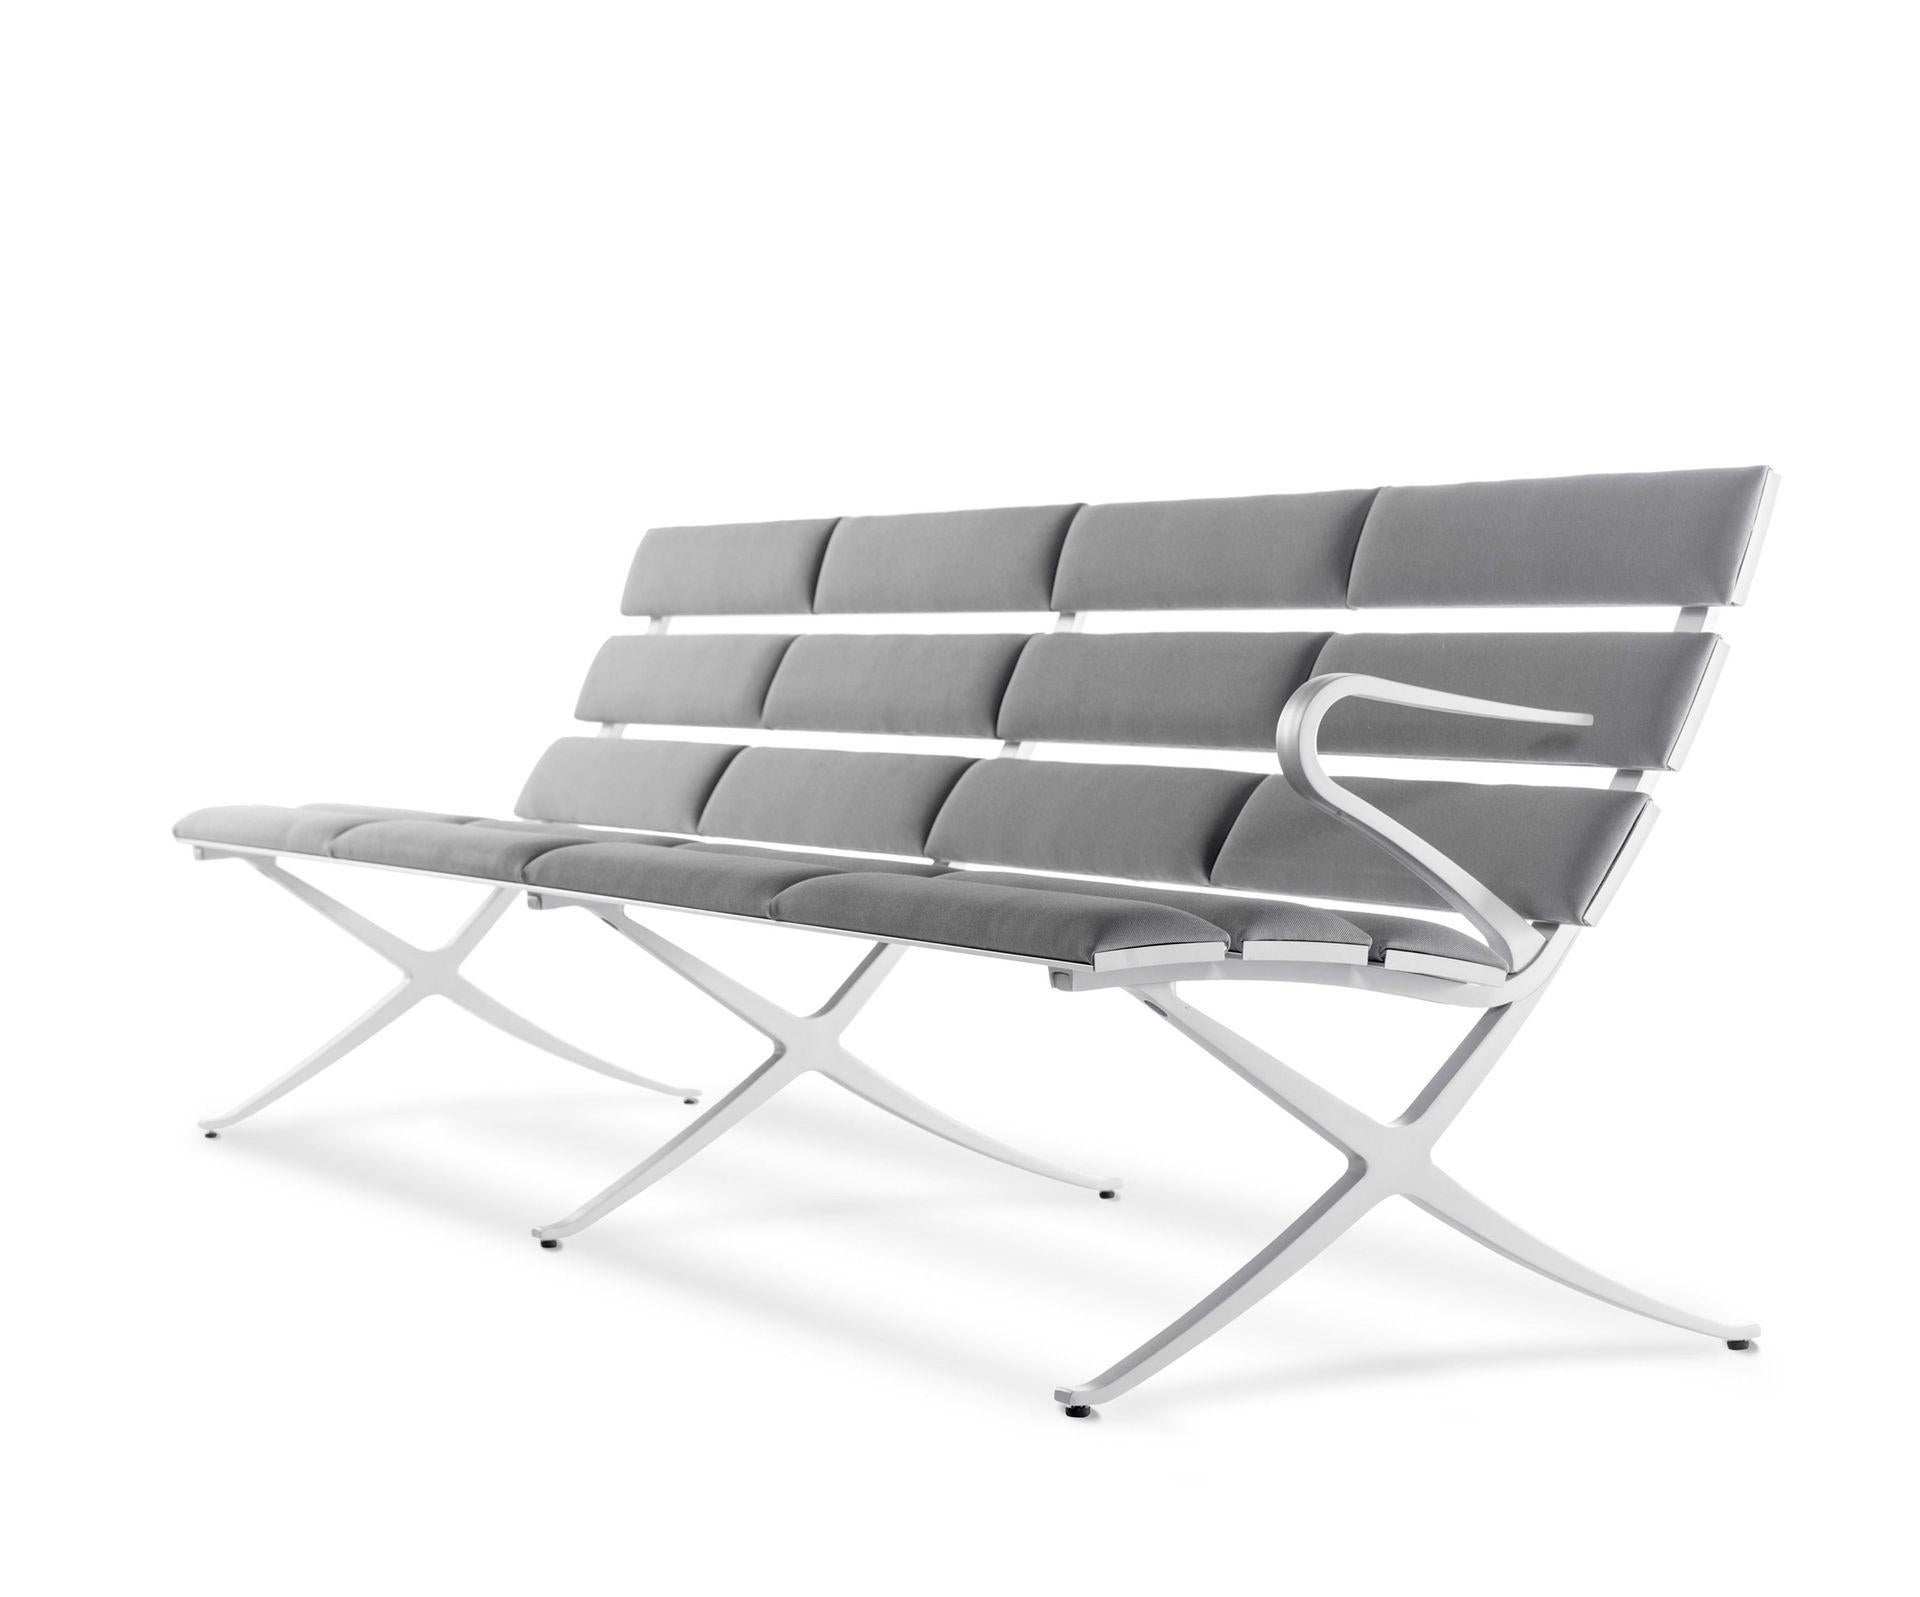 Bench B 4 seater by Konstantin Grcic.
Dimensions: D 240 x 70 x H 77 cm.
Materials: aluminium, optional upholstery.
Also available in different finishes. 

A bench that is made up of solid extruded aluminium lineal slats and cast aluminium